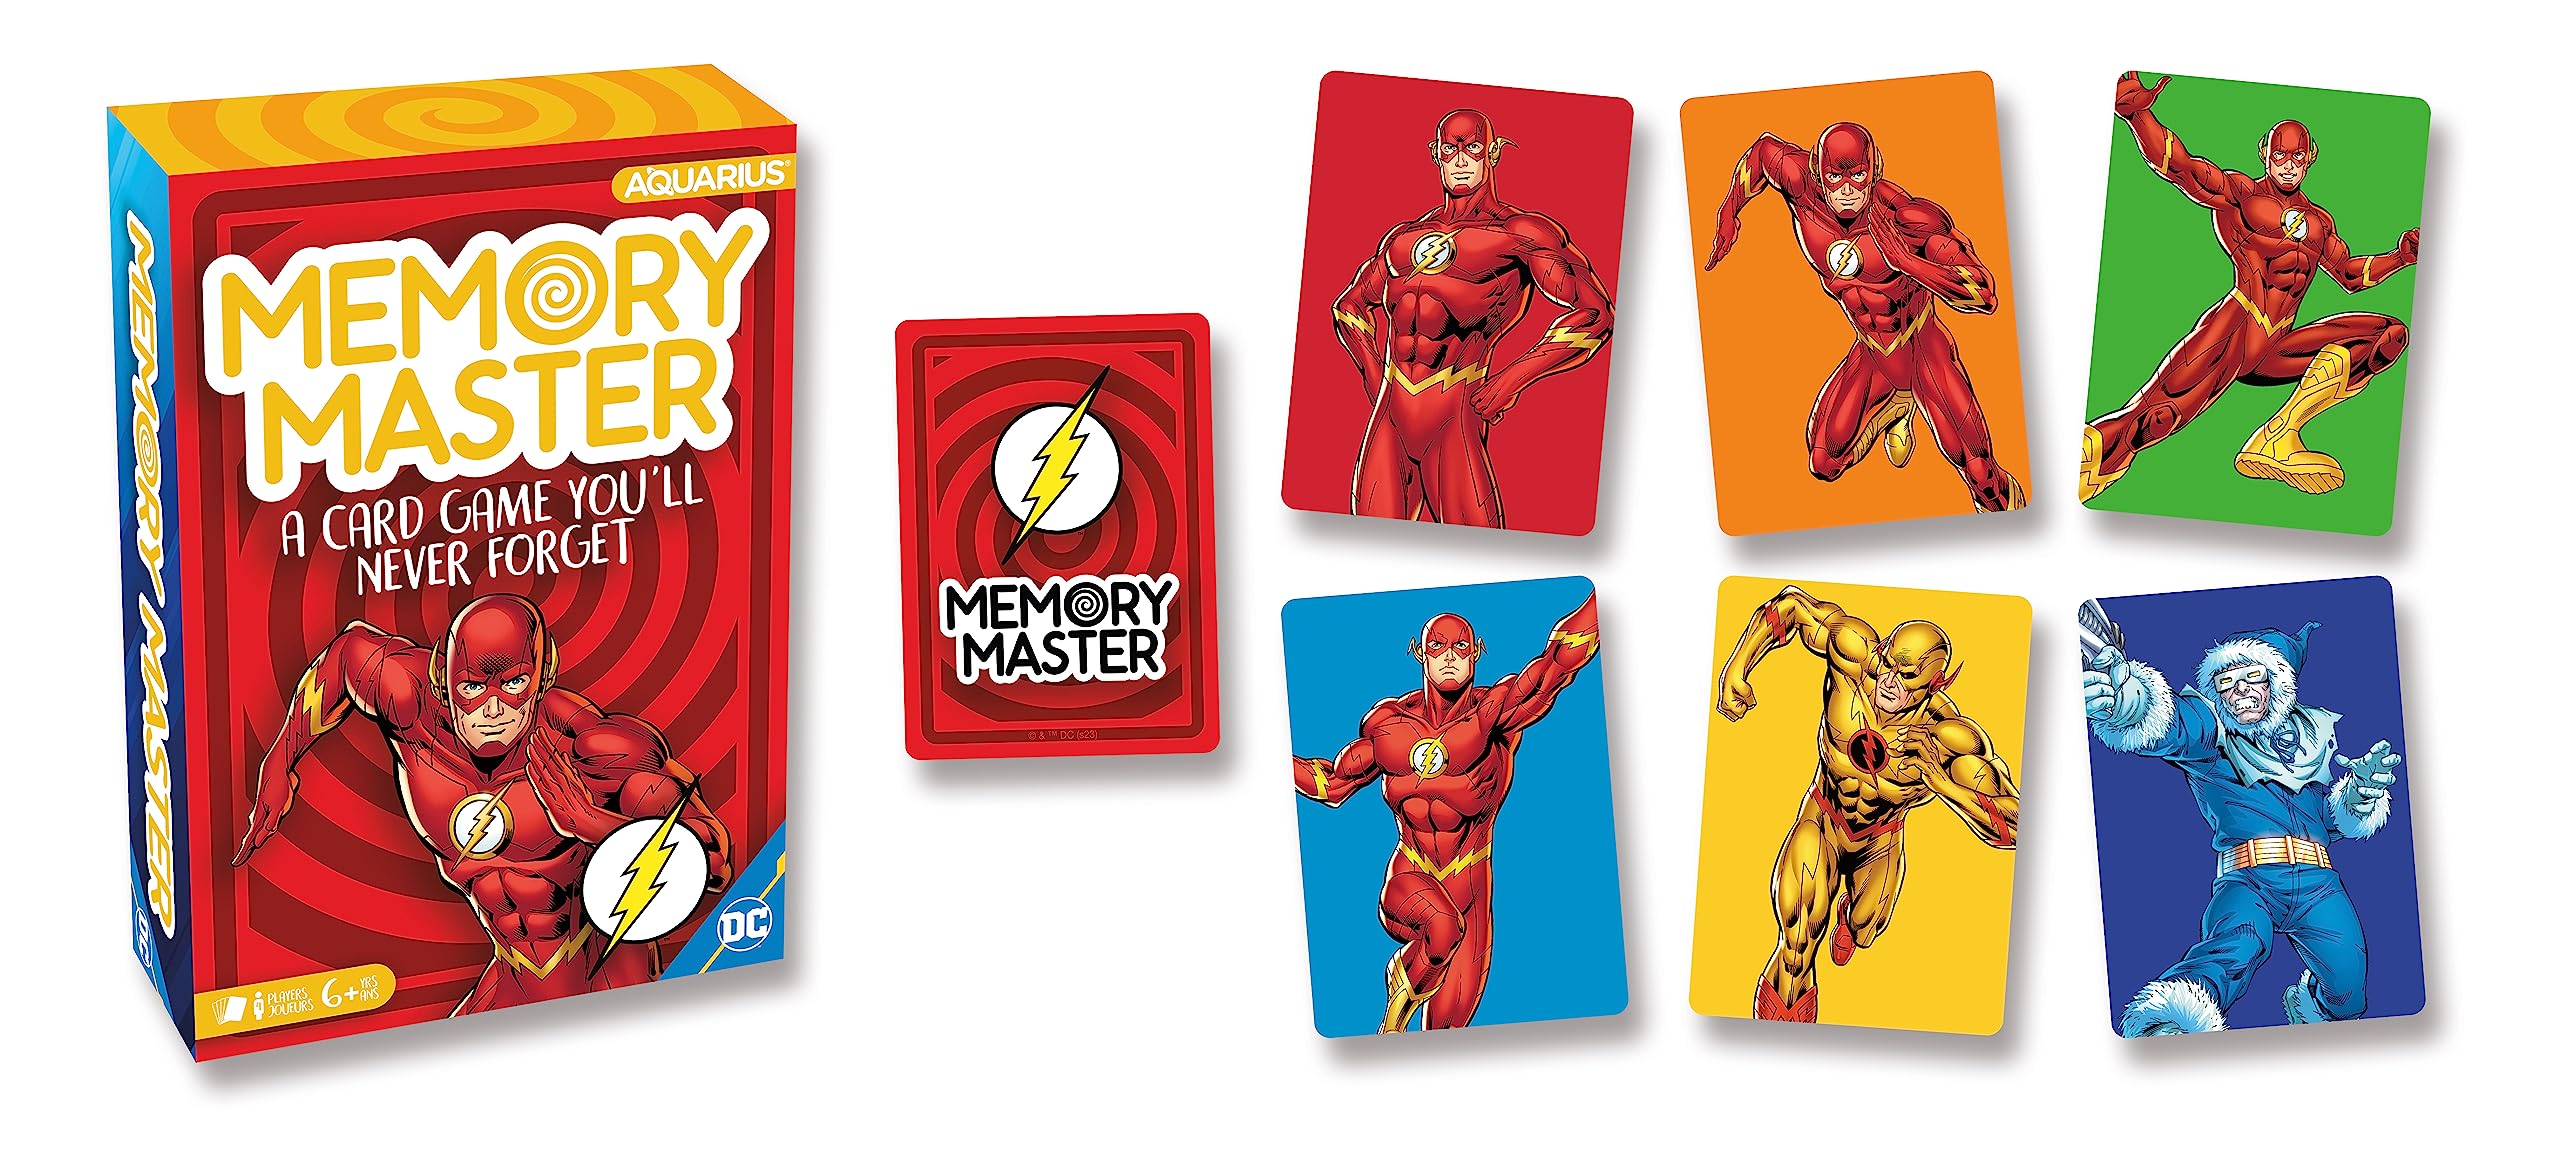 AQUARIUS DC The Flash Memory Master Card Game - Fun Family Party Game for Kids, Teens & Adults - Entertaining Game Night Gift - Officially Licensed DC Merchandise